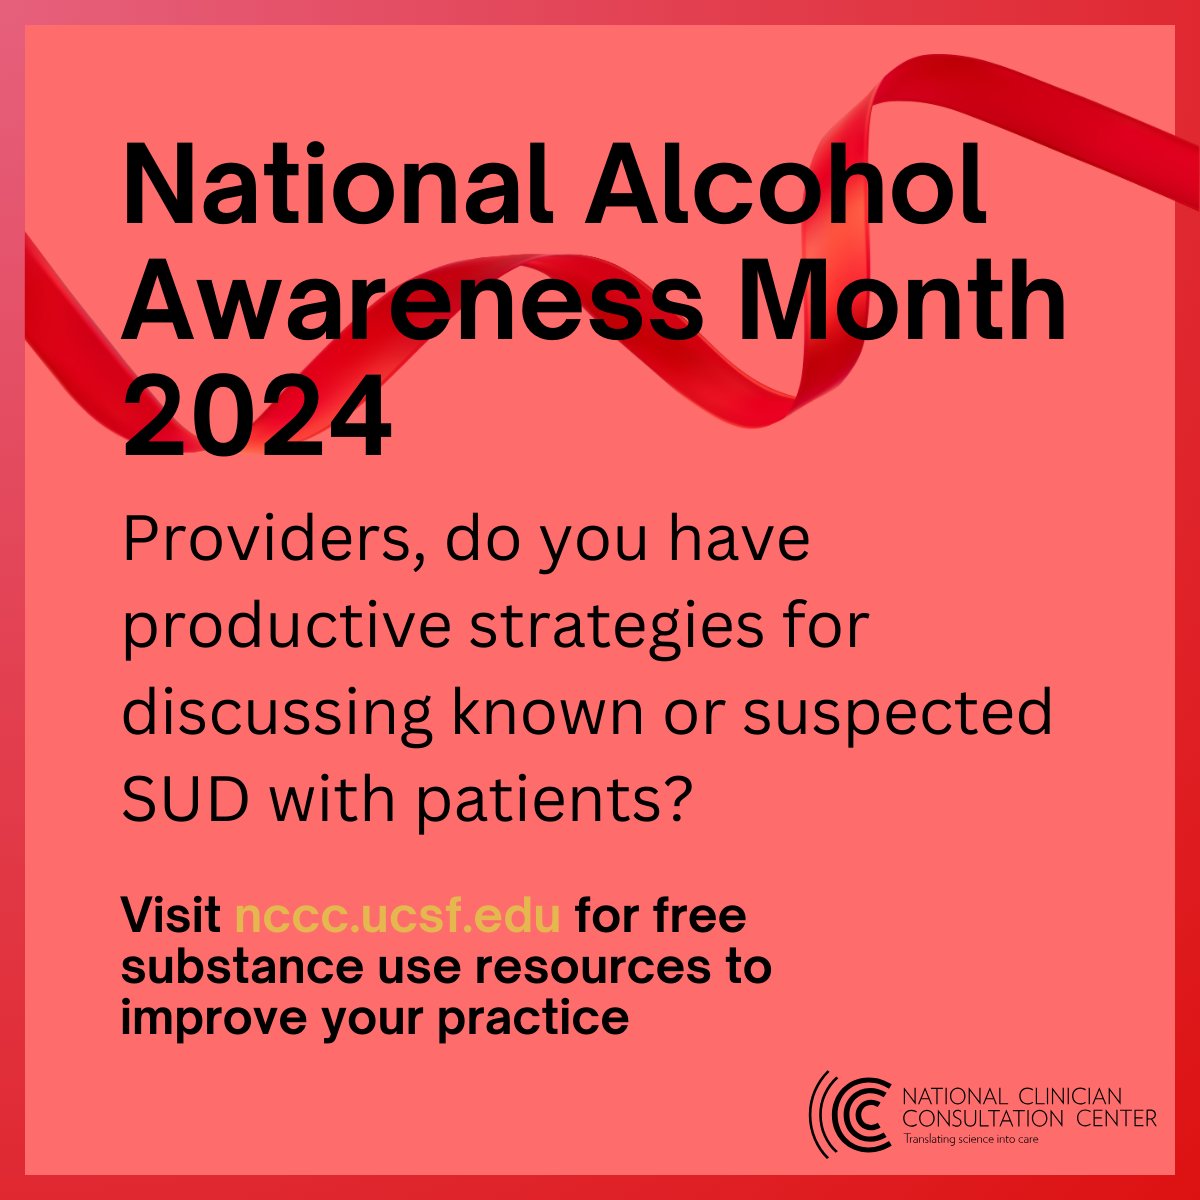 Clinicians, we know discussing #alcohol and substance use disorders (SUDs) can be tricky. Our National Substance Use Warmline has addiction medicine specialists to help you develop care strategies that work. Call free today: bit.ly/3UdcaZh #AlcoholAwarenessMonth #MedEd